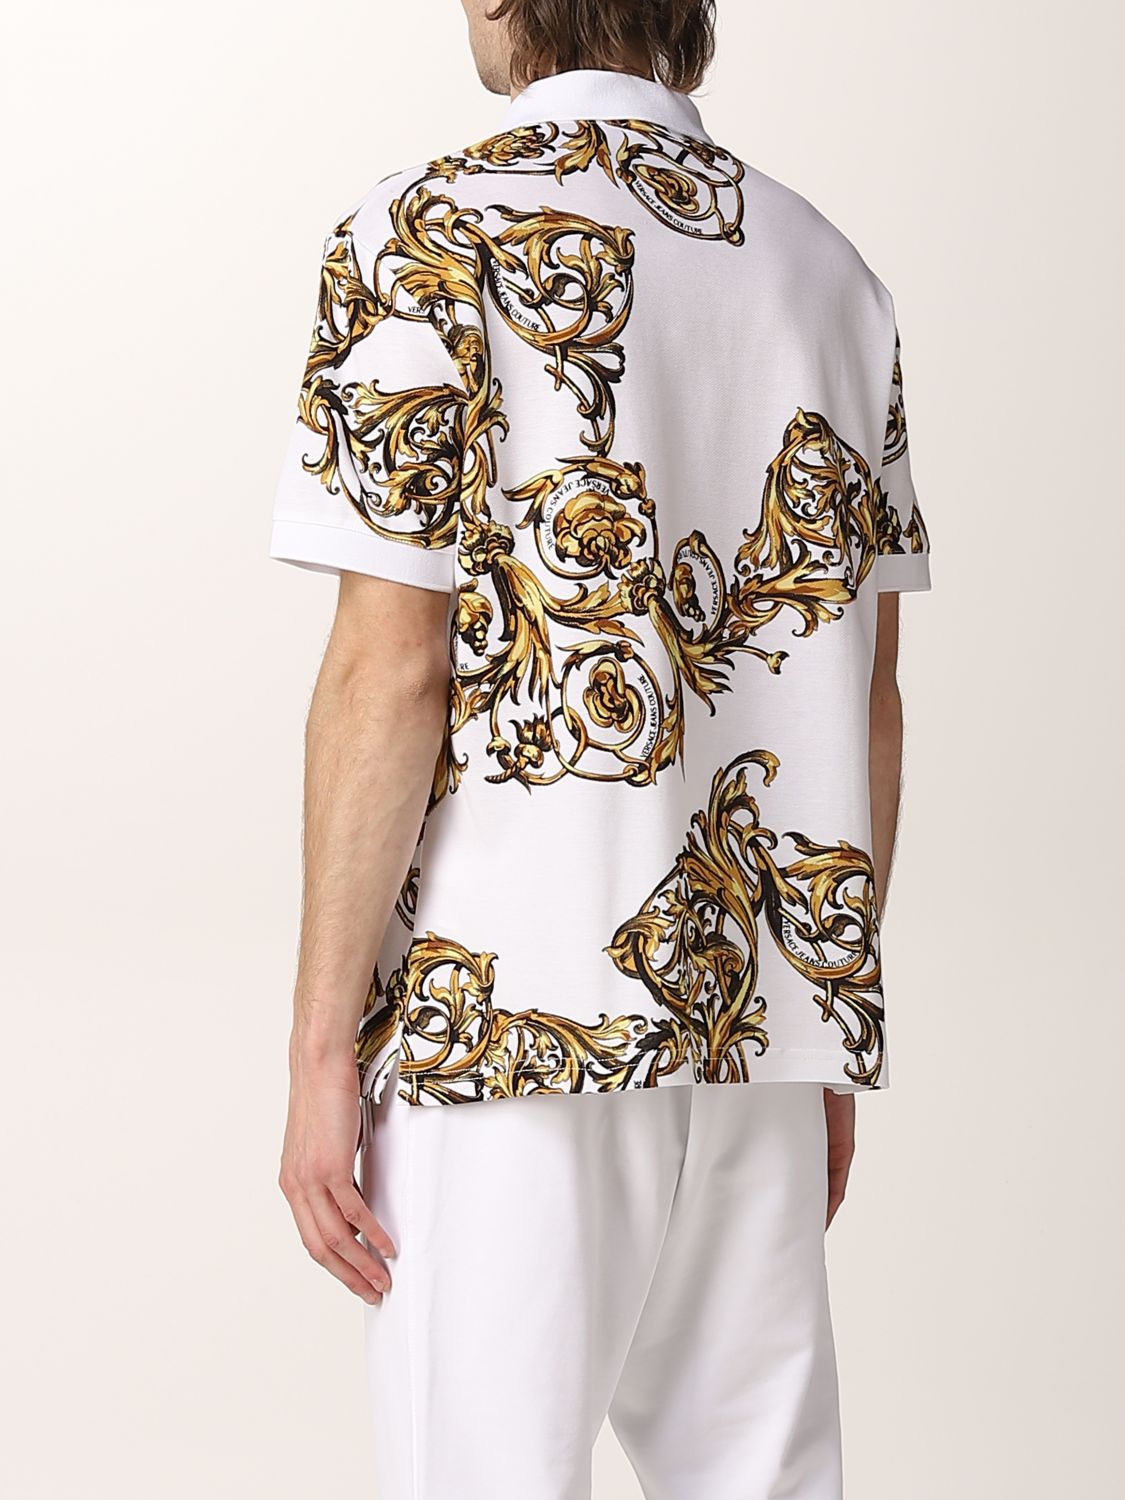 VERSACE JEANS COUTURE: polo shirt with baroque pattern - White | Polo ...